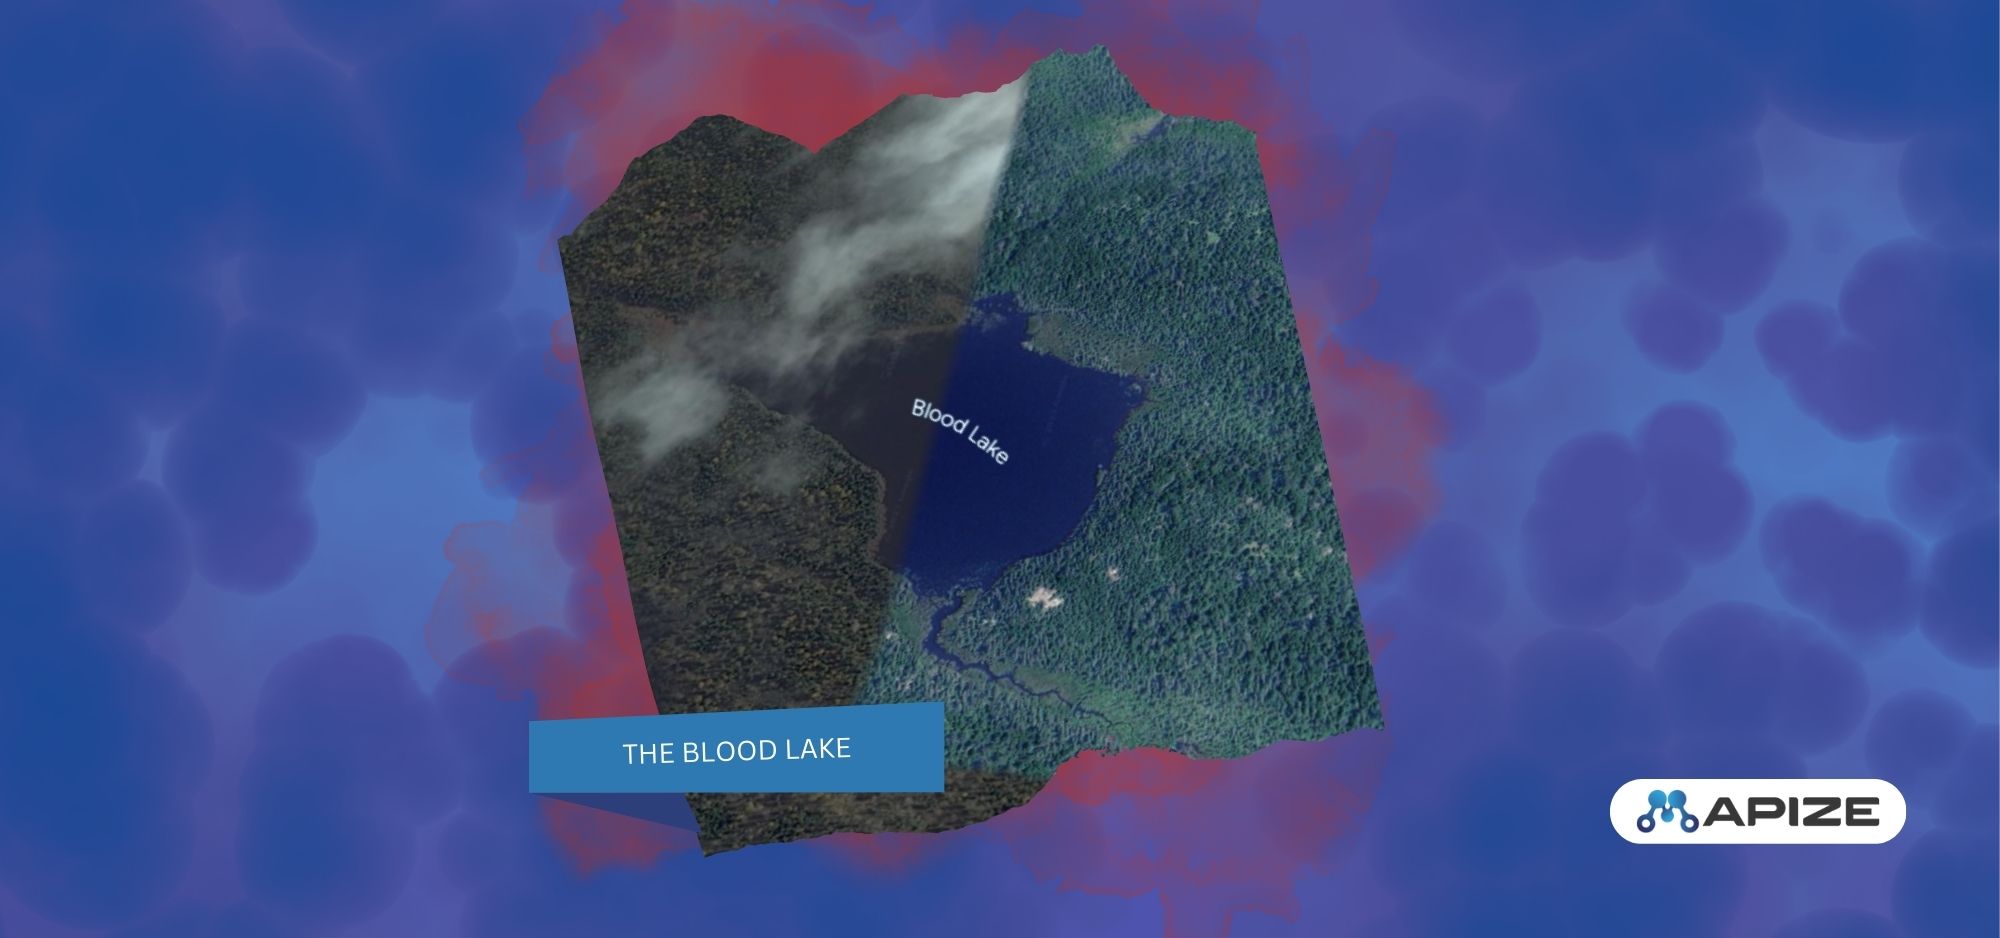 The location of the blood lake on Google Earth.